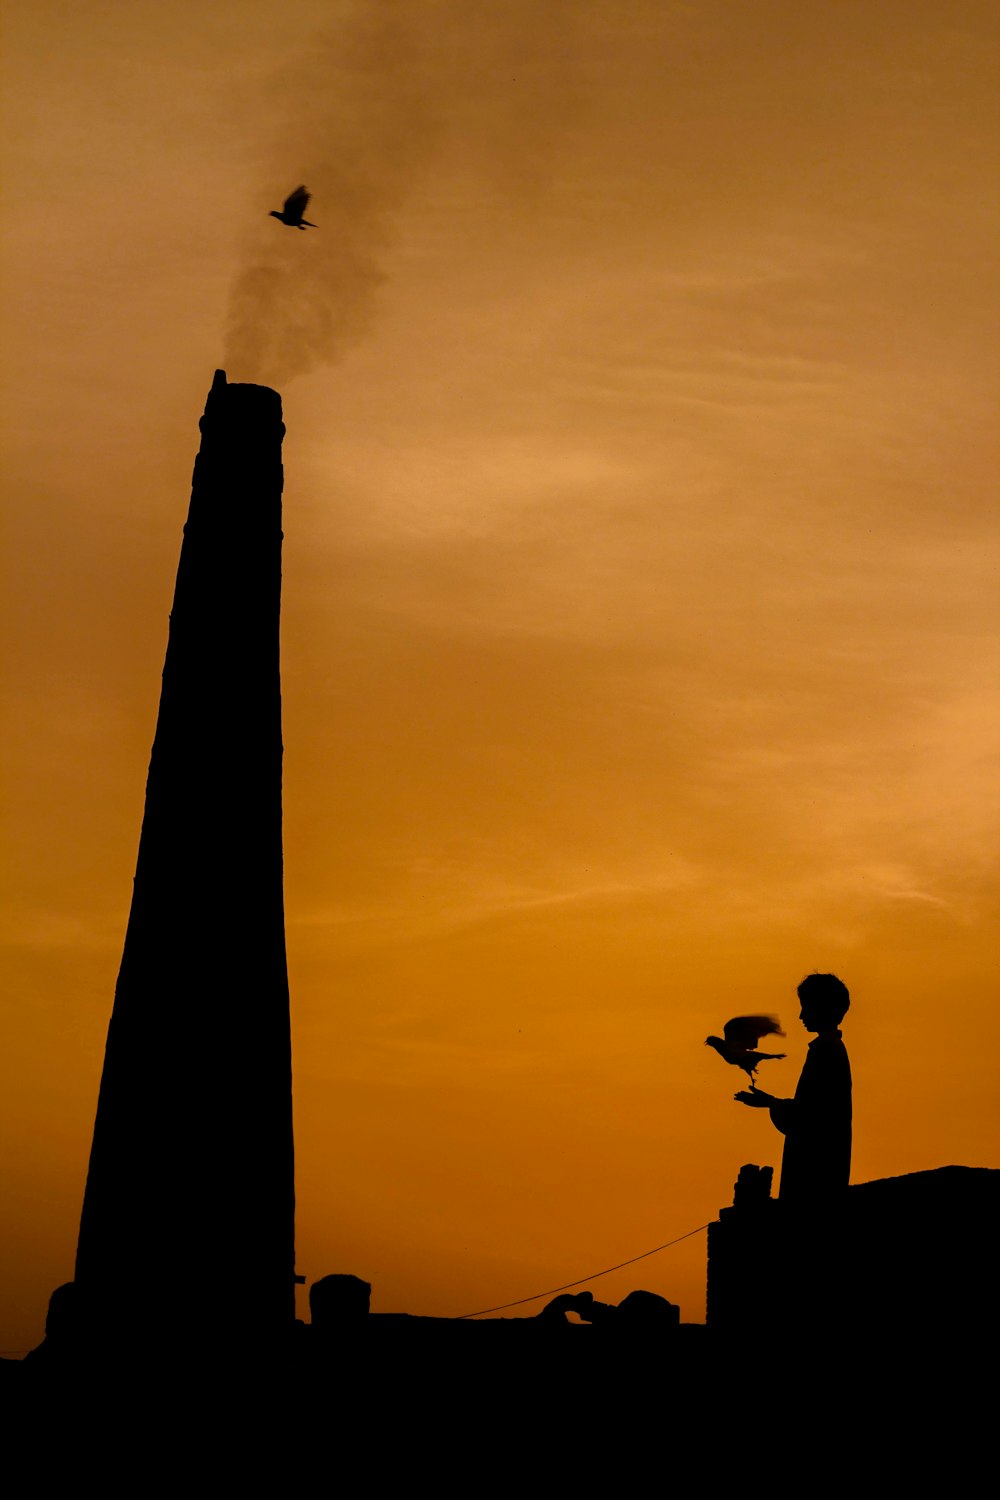 silhouette of man and woman sitting on concrete post under cloudy sky during daytime